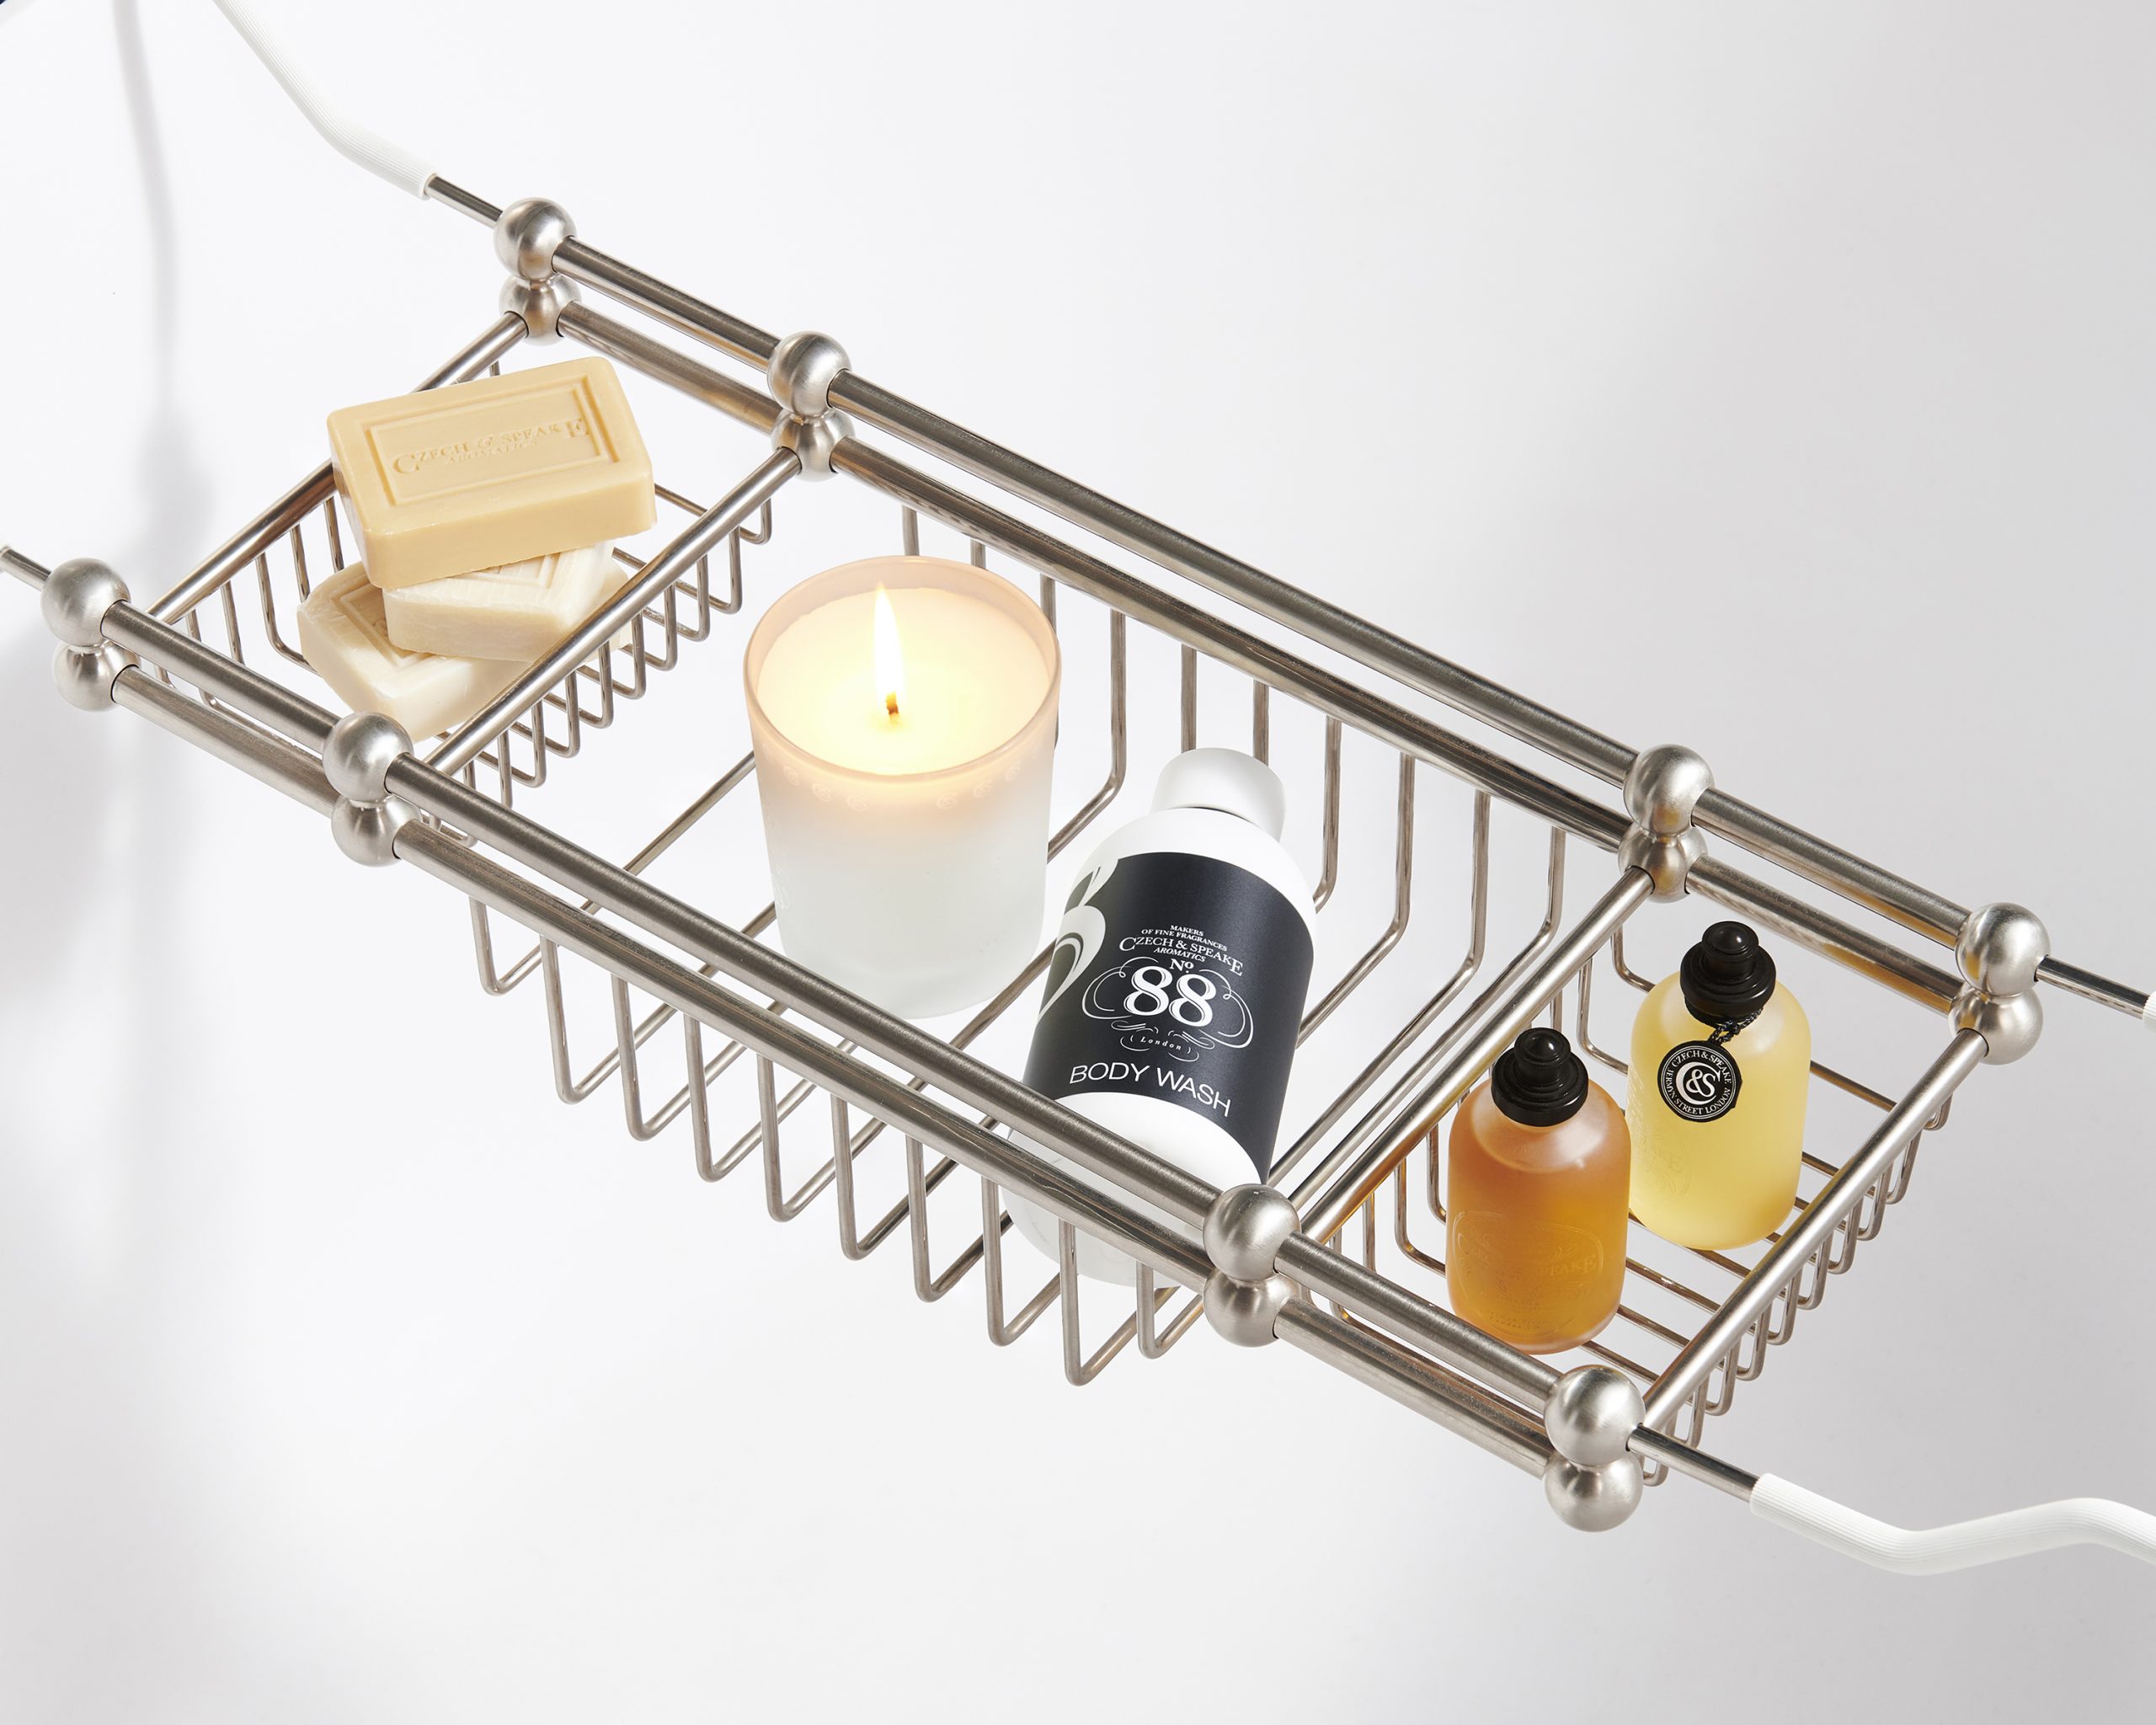 Czech & Speake Edwardian Bath Rack over a bath filled with Hand soaps, scented candle, No.88 Body Wash and Bath oils.